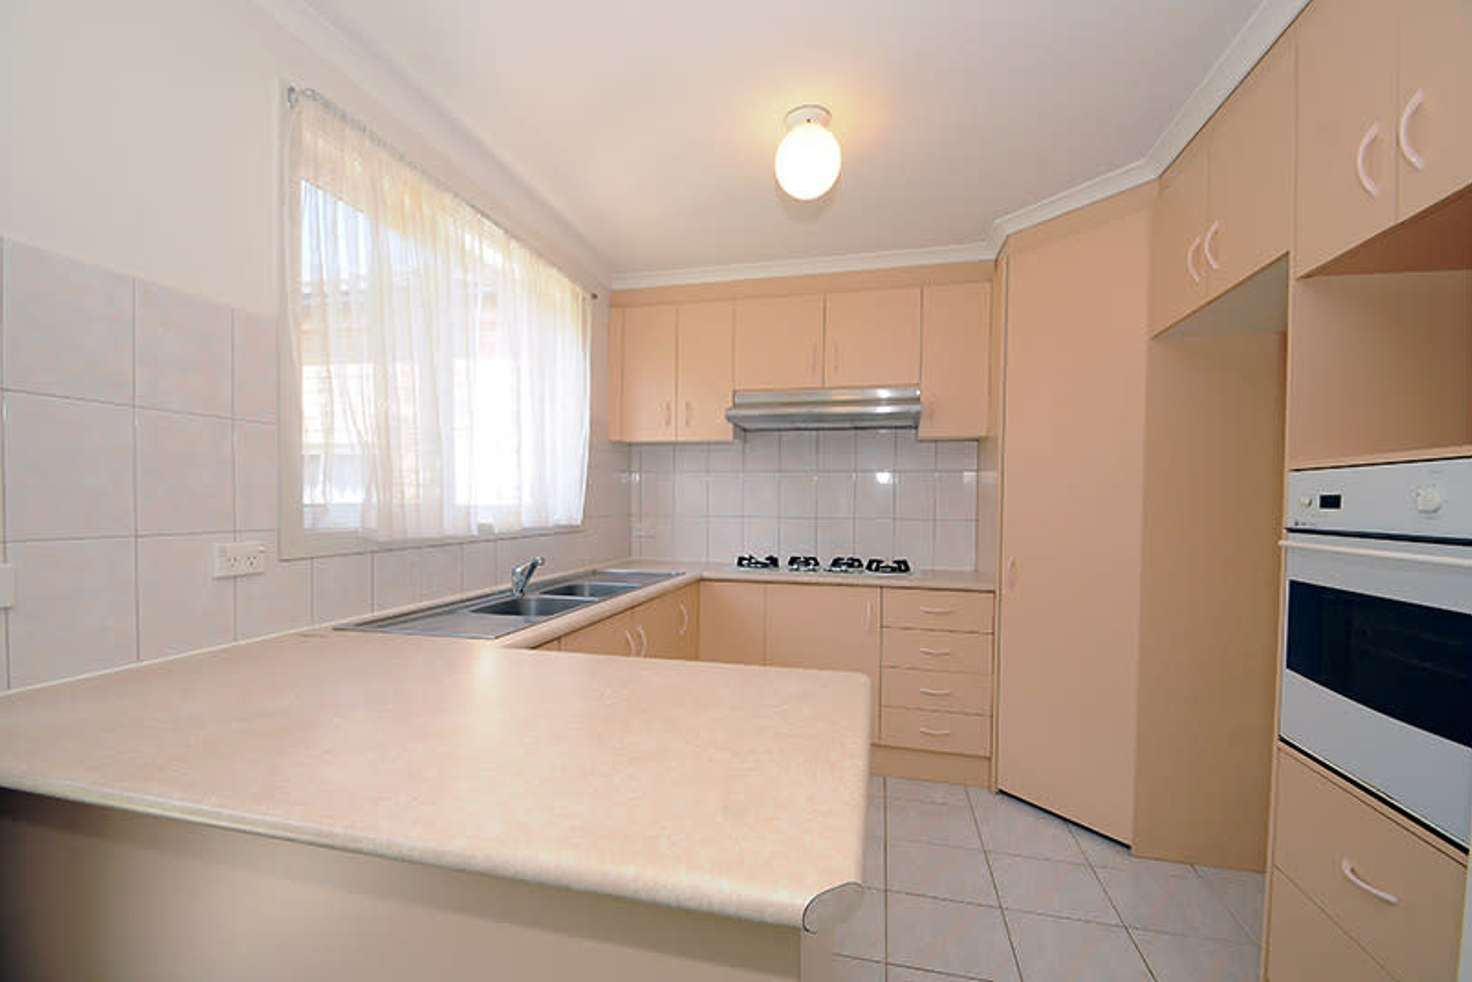 Main view of Homely house listing, 4 Iskandar Court, Chadstone VIC 3148